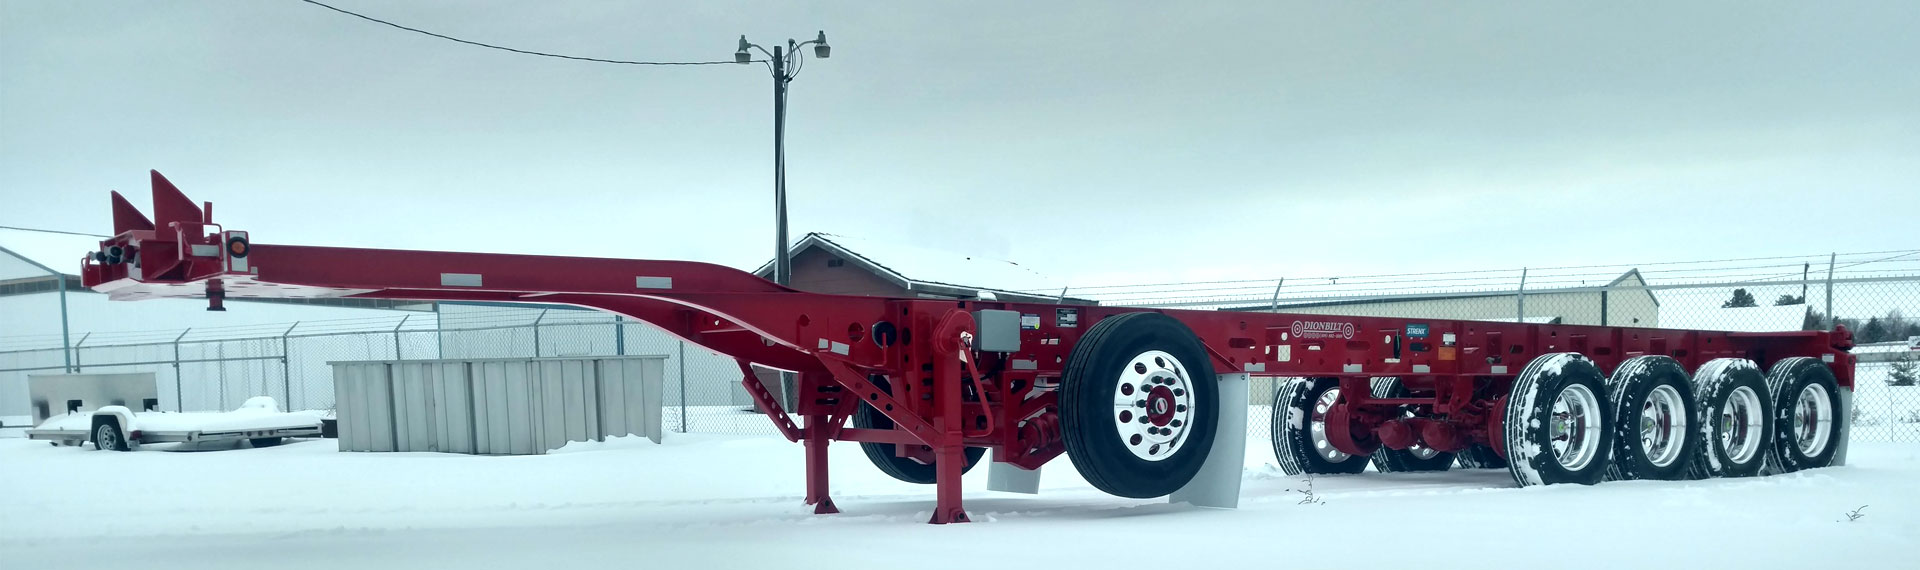 A long lightweight trailer chassis made with Strenx® 100 standing on snowy ground